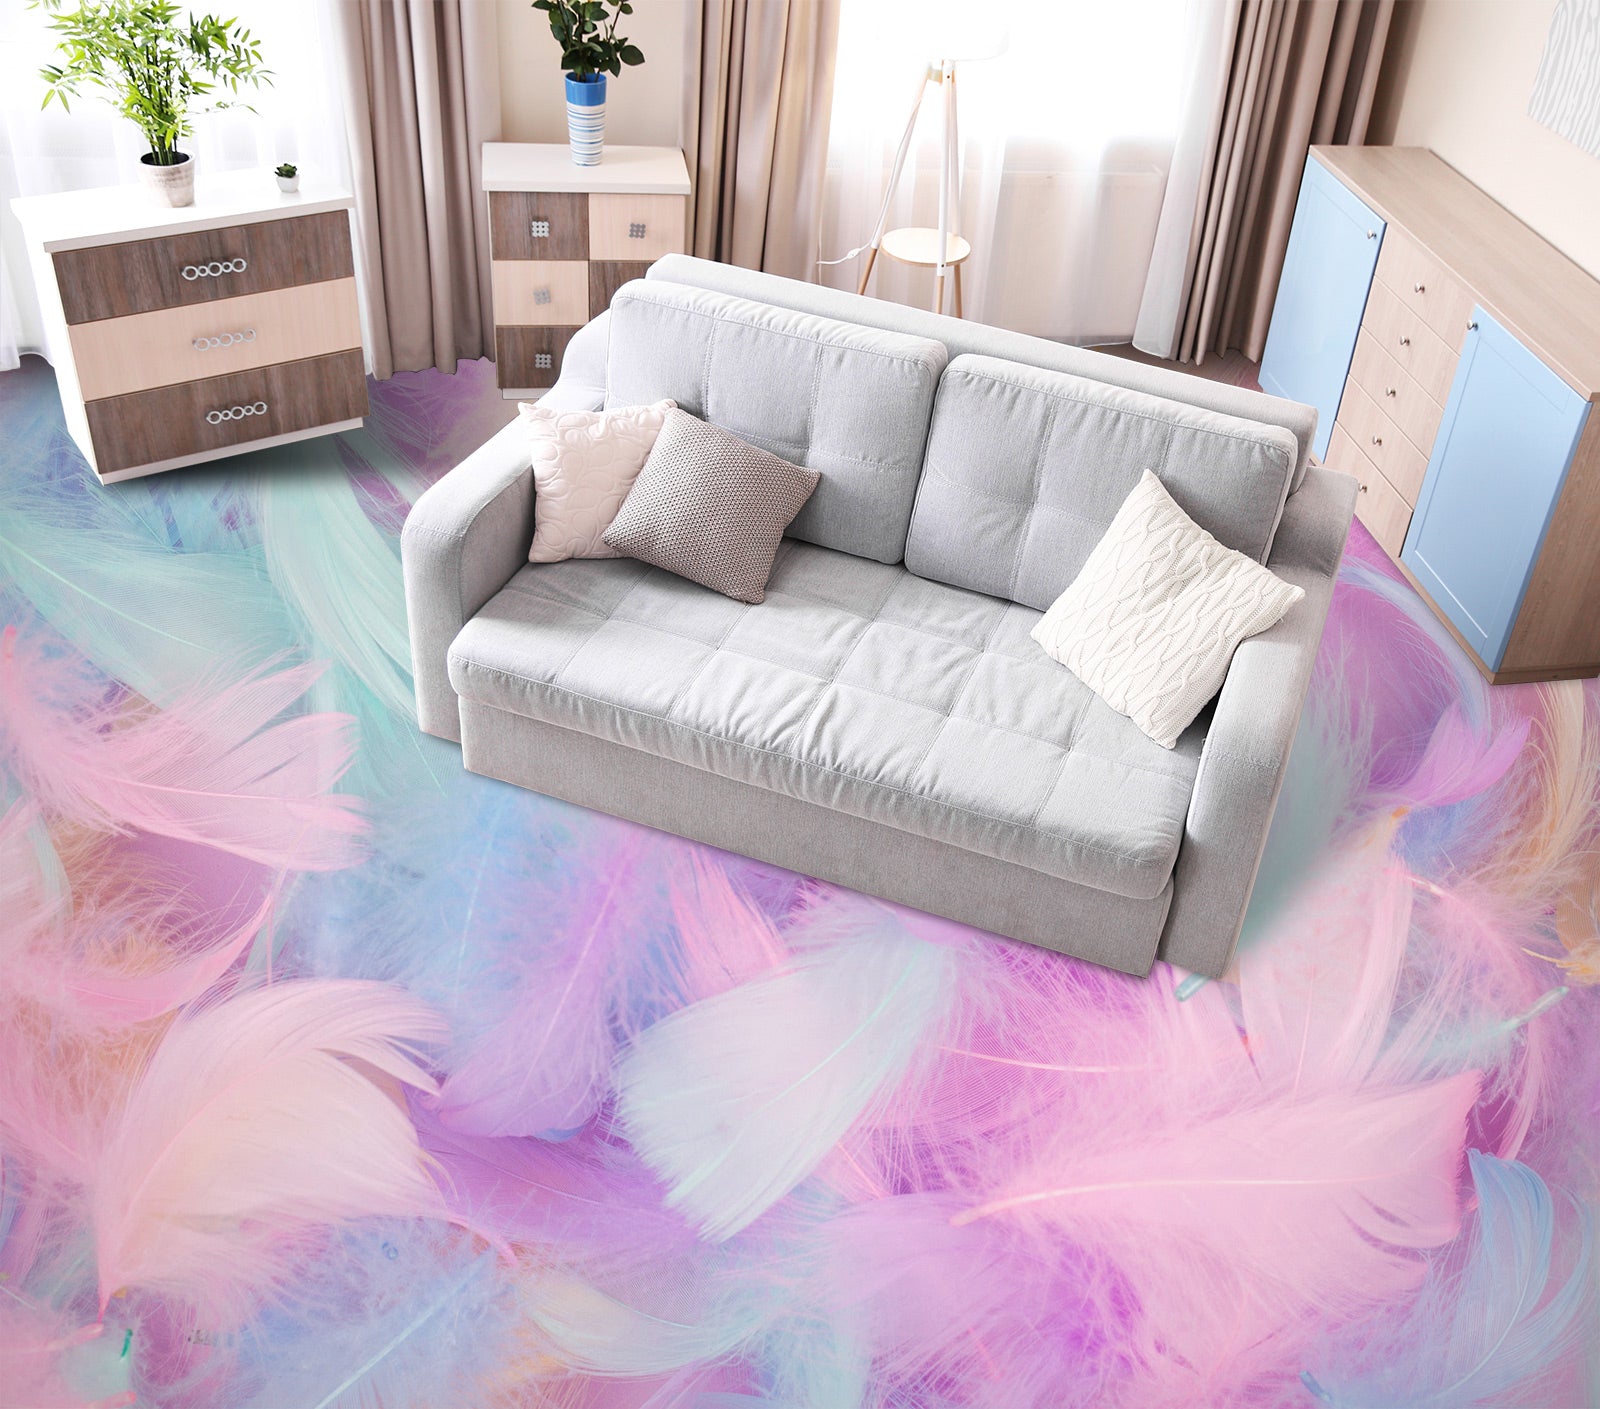 3D Sweet Feathers 1132 Floor Mural  Wallpaper Murals Self-Adhesive Removable Print Epoxy